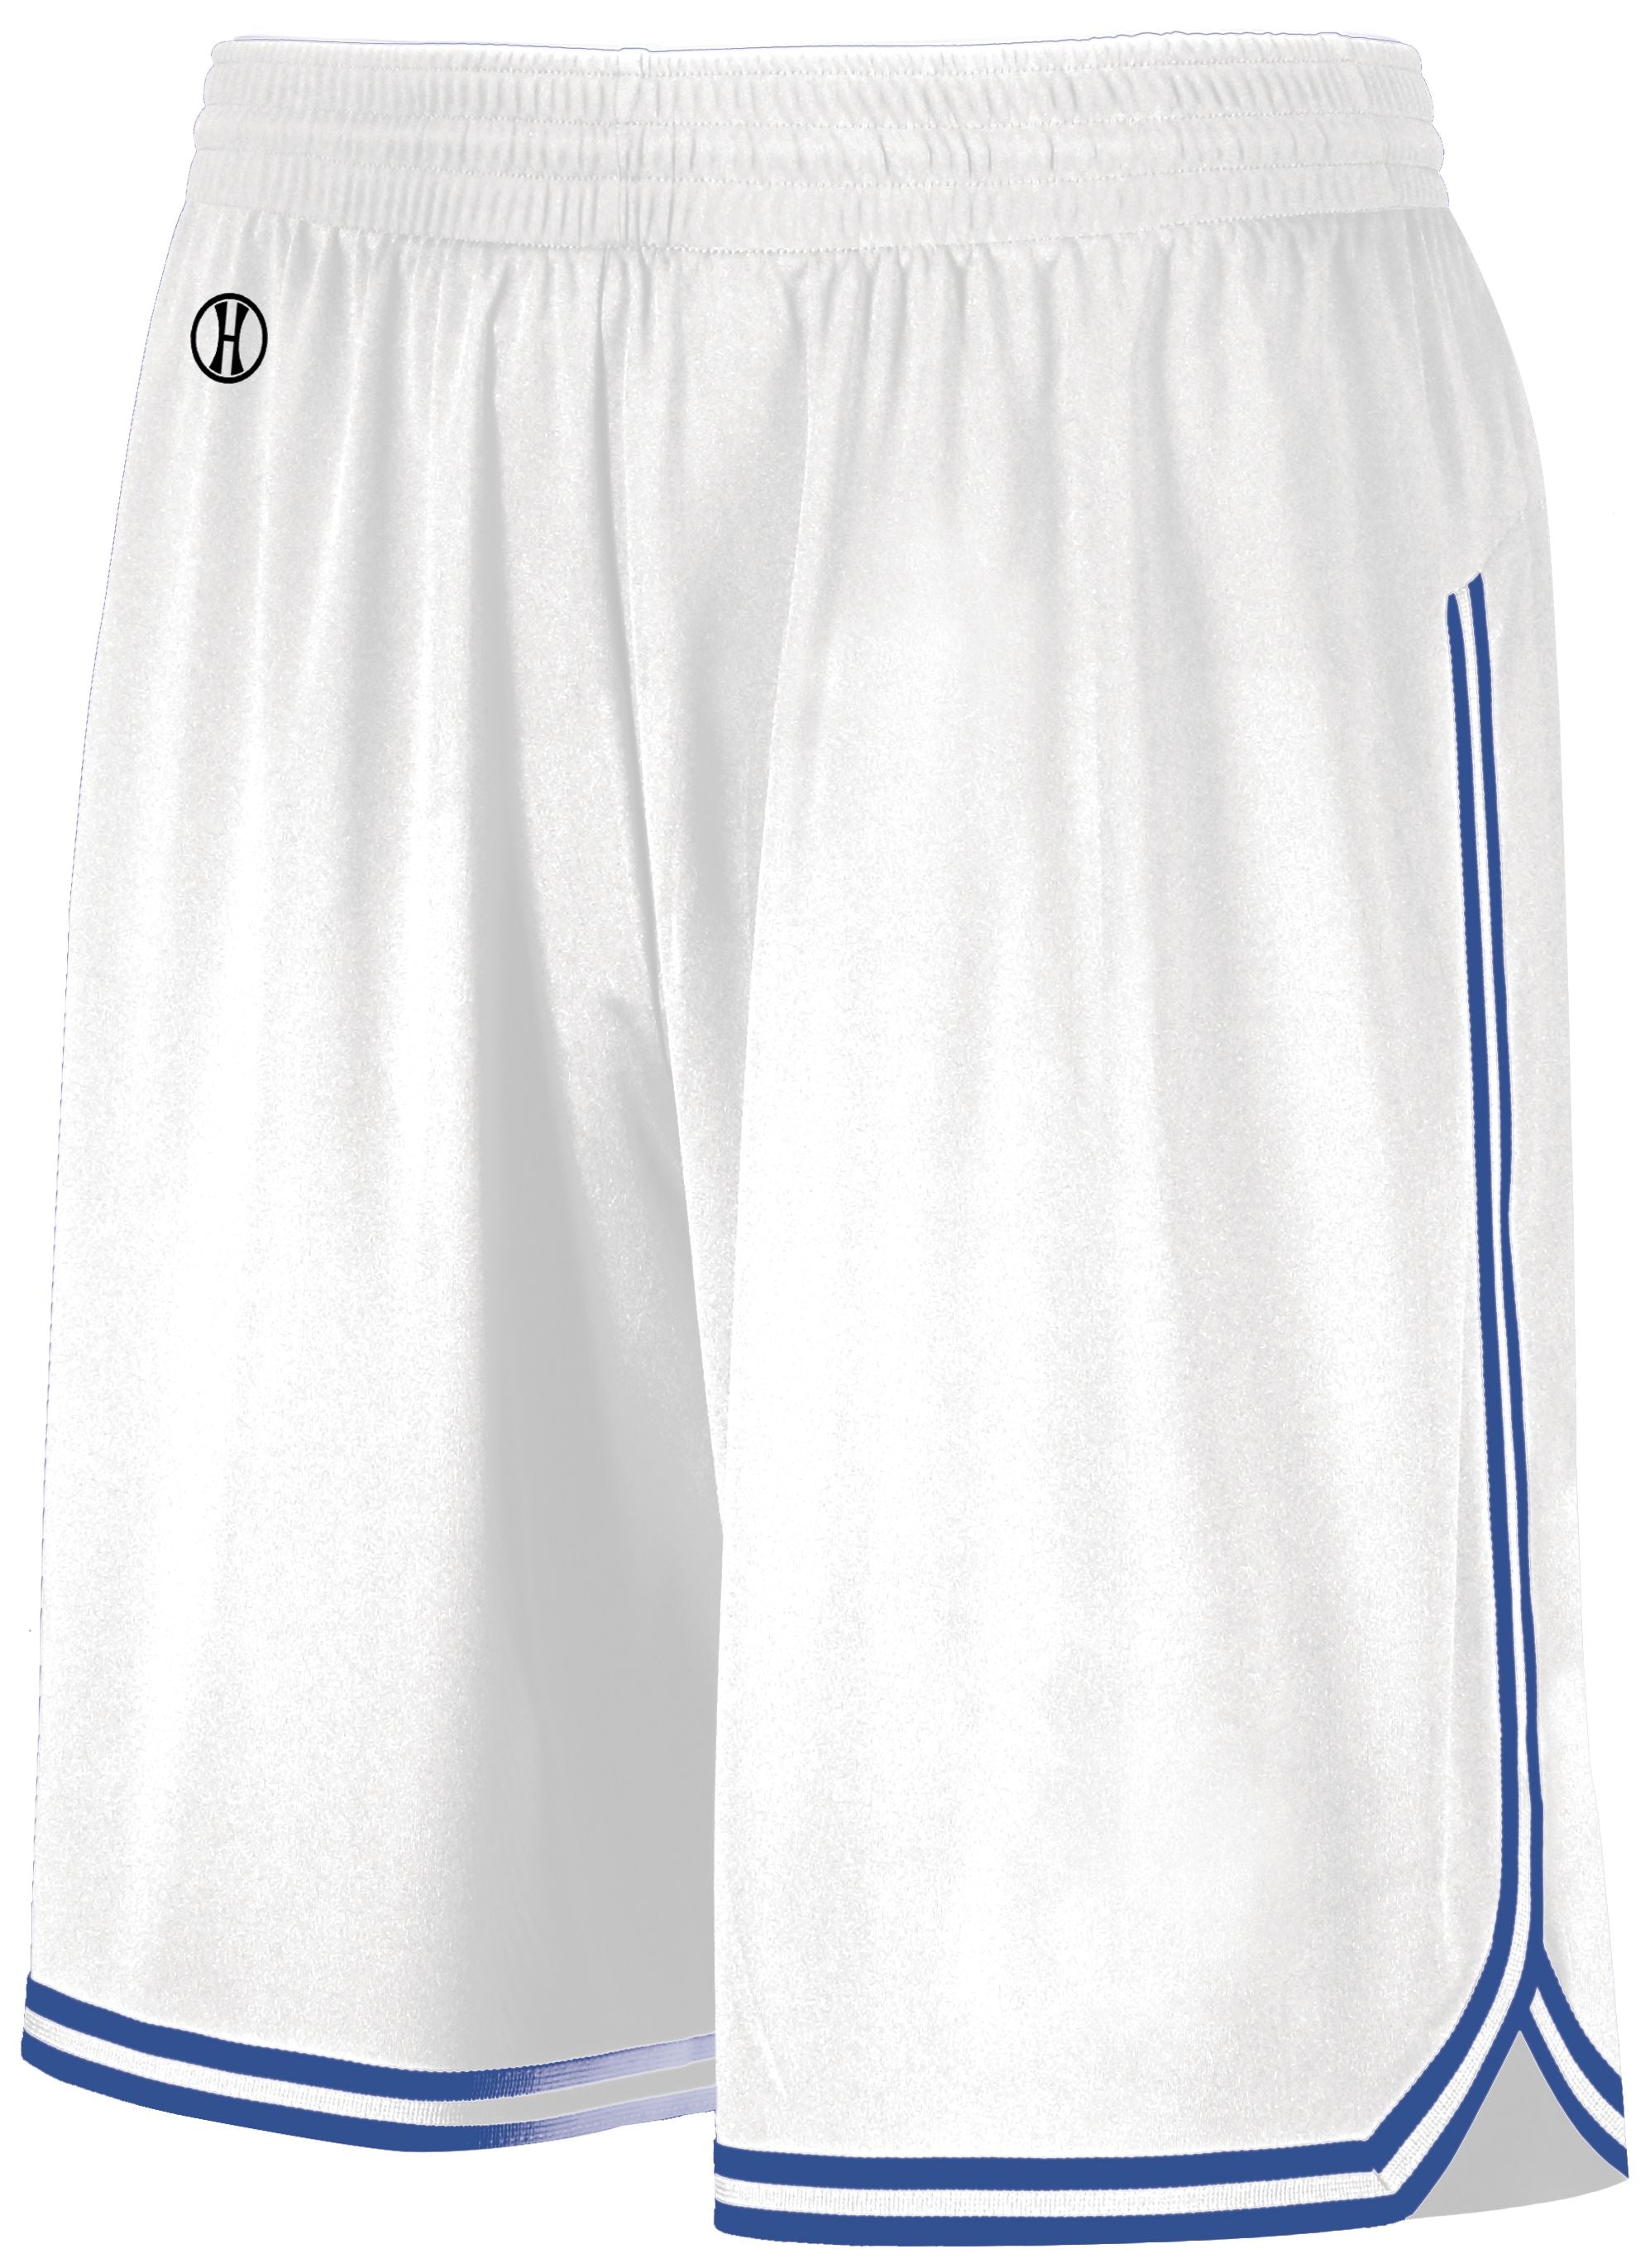 Holloway Retro Basketball Shorts in White/Royal  -Part of the Adult, Adult-Shorts, Basketball, Holloway, All-Sports, All-Sports-1 product lines at KanaleyCreations.com